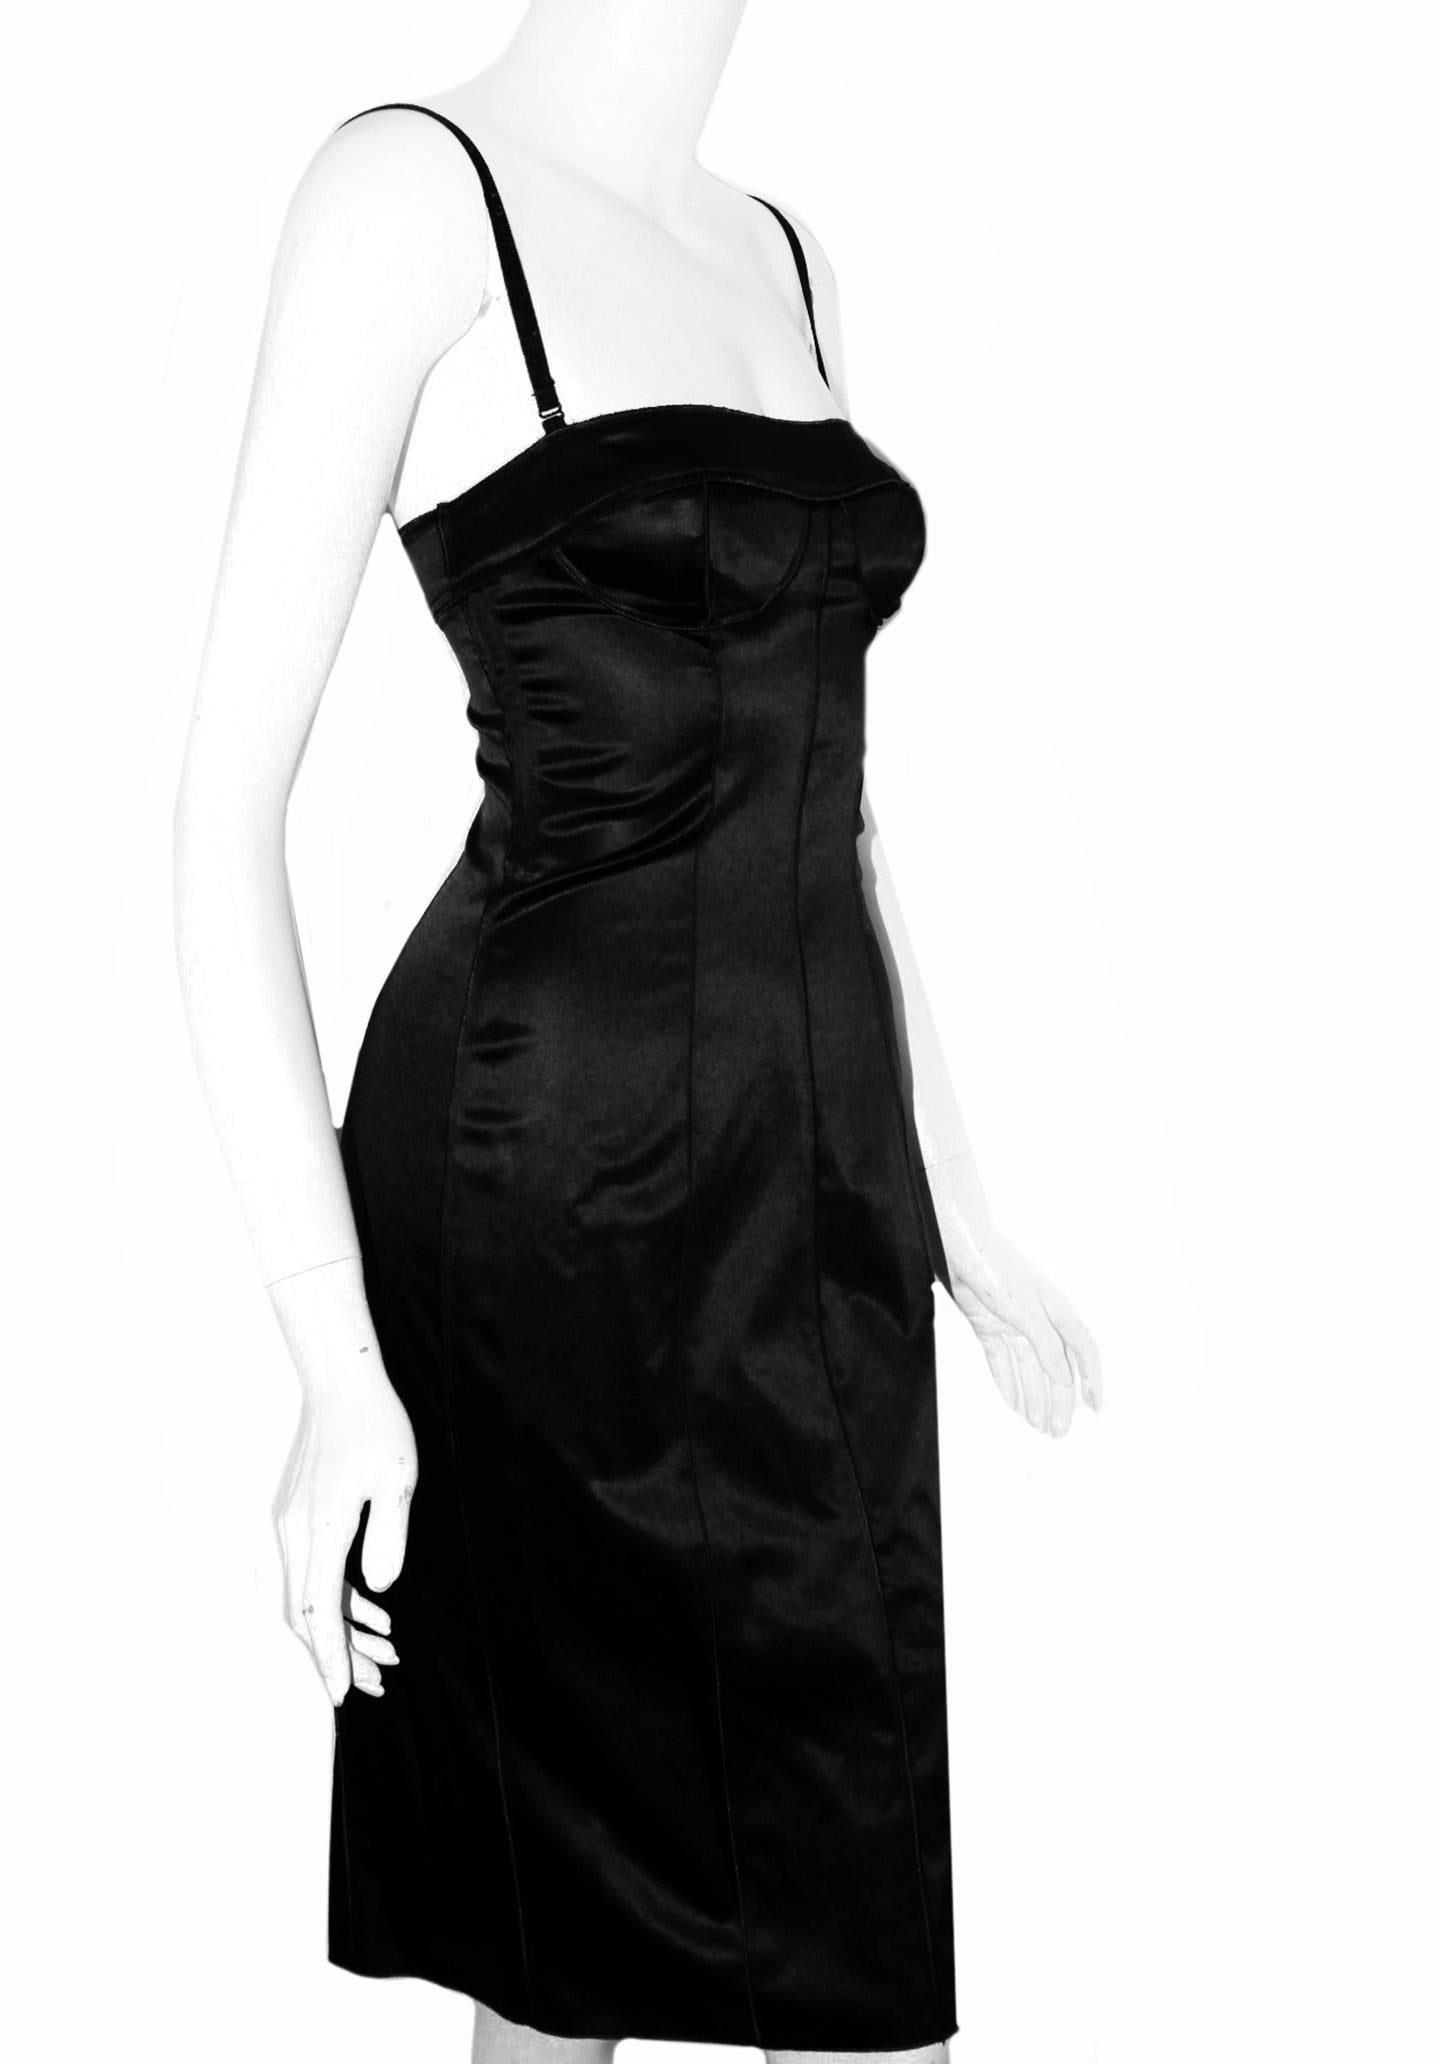 D & G  sexy black dress is Dolce & Gabbana through and through with its structured body and curve seams.  Constructed in form fitting midi style with added spandex for comfortable wear.  This spaghetti strap dress includes a back exposed zipper in